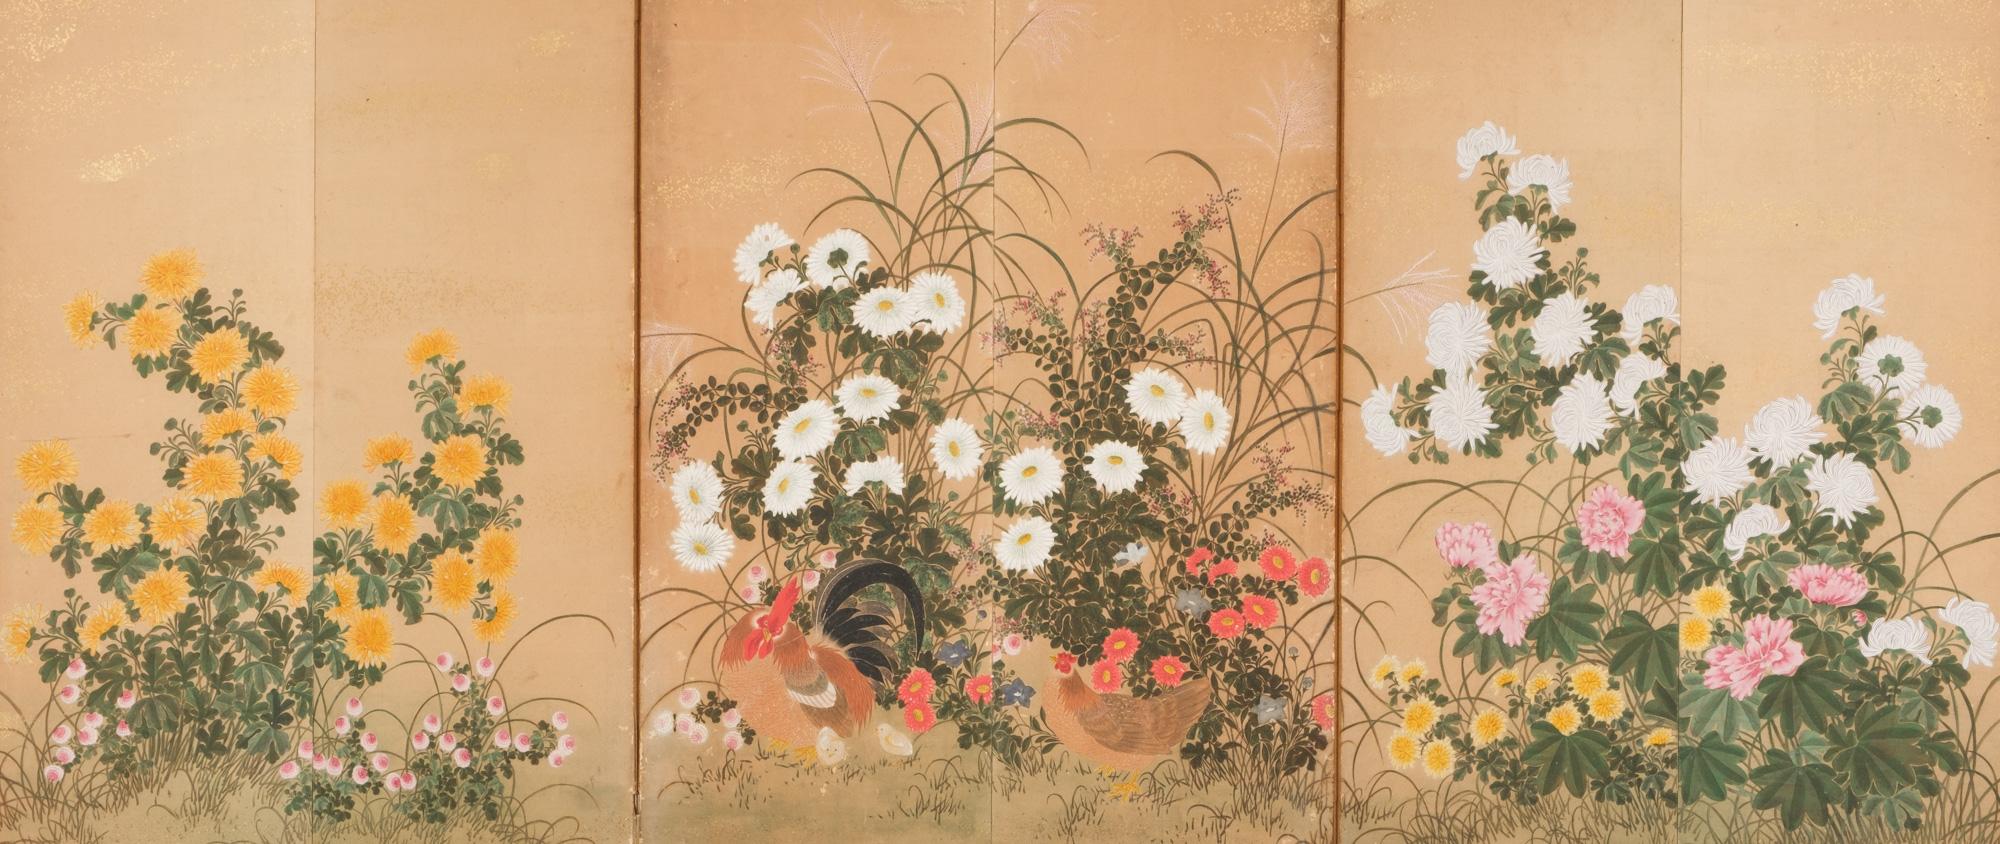 A charming medium-size six-panel byôbu (folding screen) with a vibrant polychrome painting of a rooster with its family amidst a luscious flower garden.

The garden is filled with all sorts of different blooming flowers, like a different types of